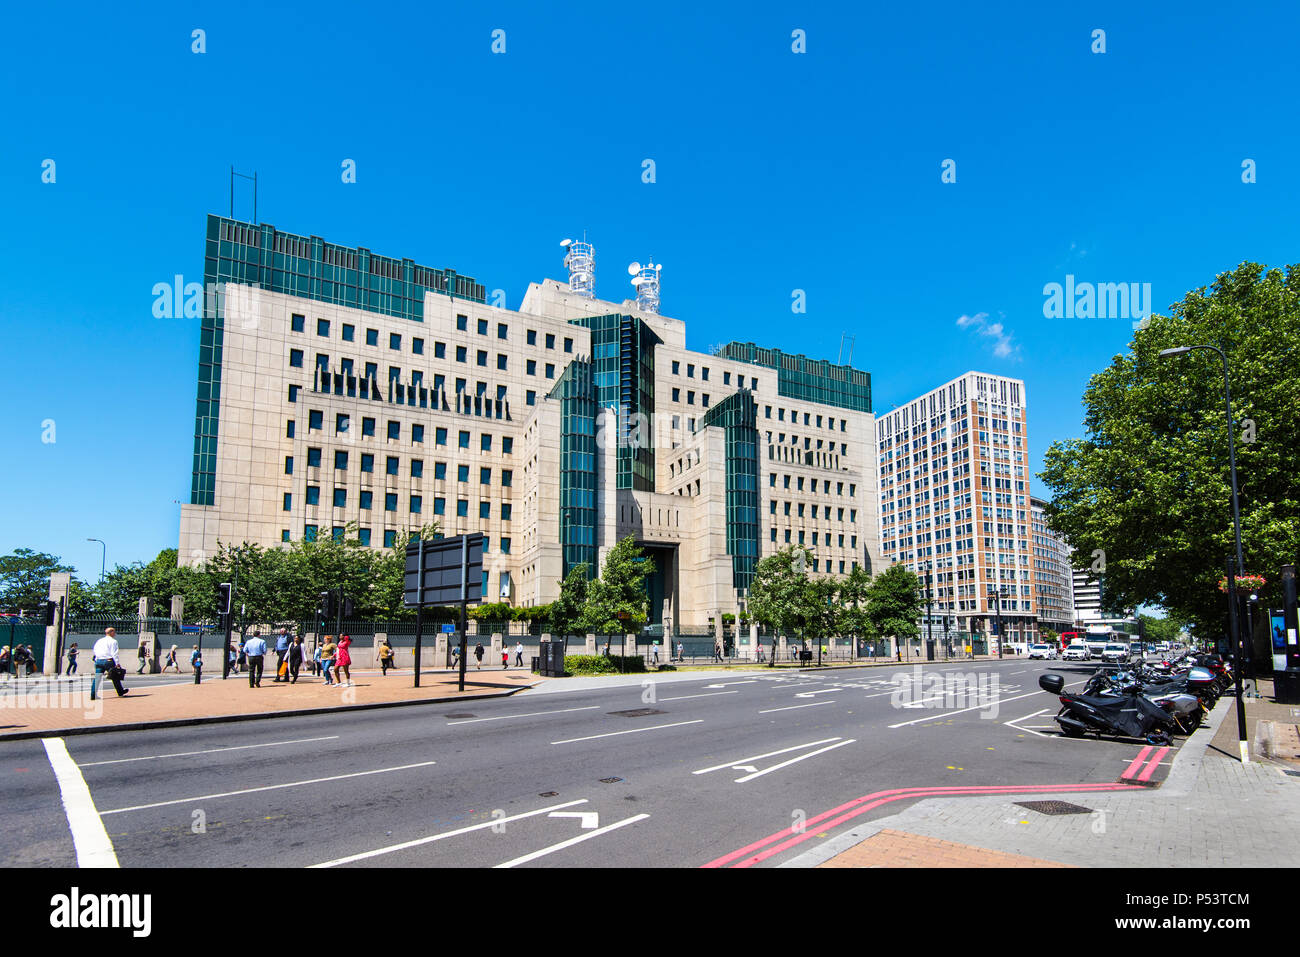 LONDON, UK - 18JUN2018: The SIS Building at Albert Embankment, Vauxhall is the headquarters of MI6. Viewed from the south across Albert Embankment. Stock Photo